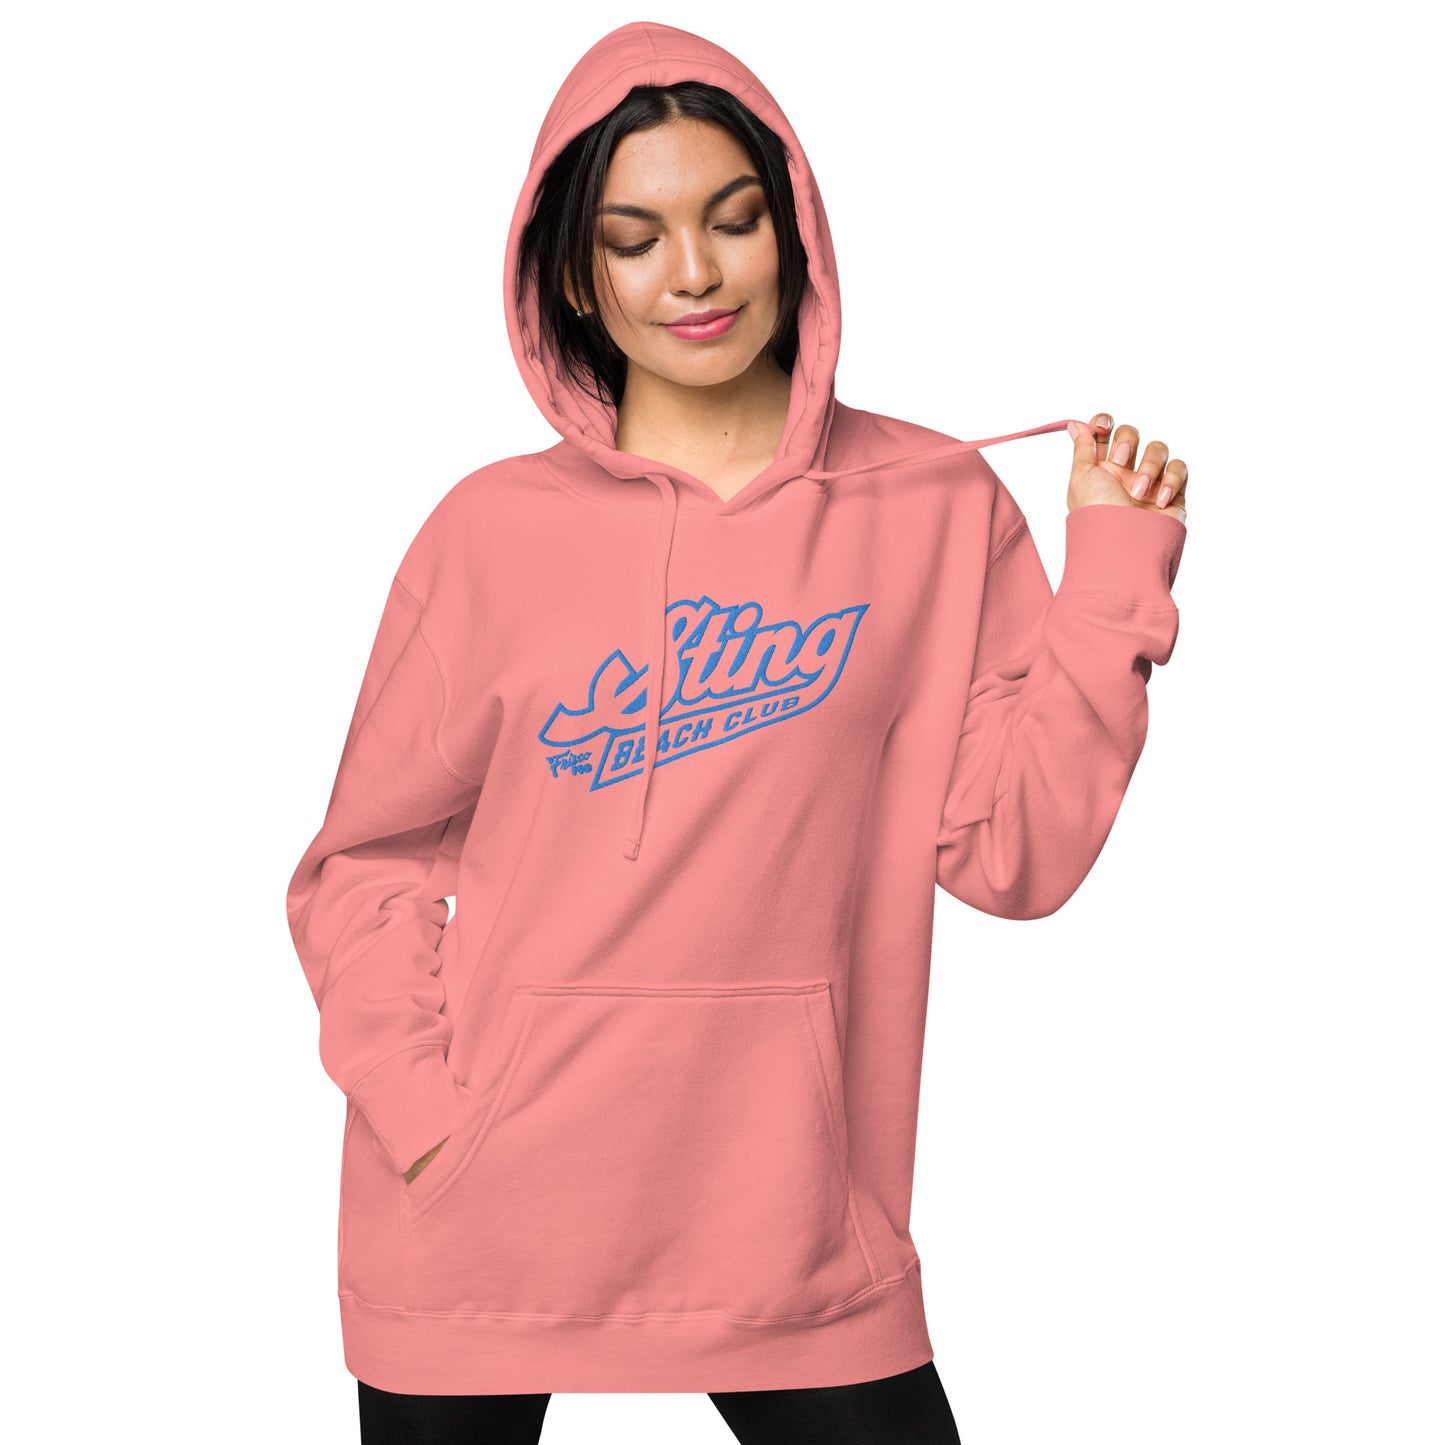 Sting Beach Club Embroidered Hoodie